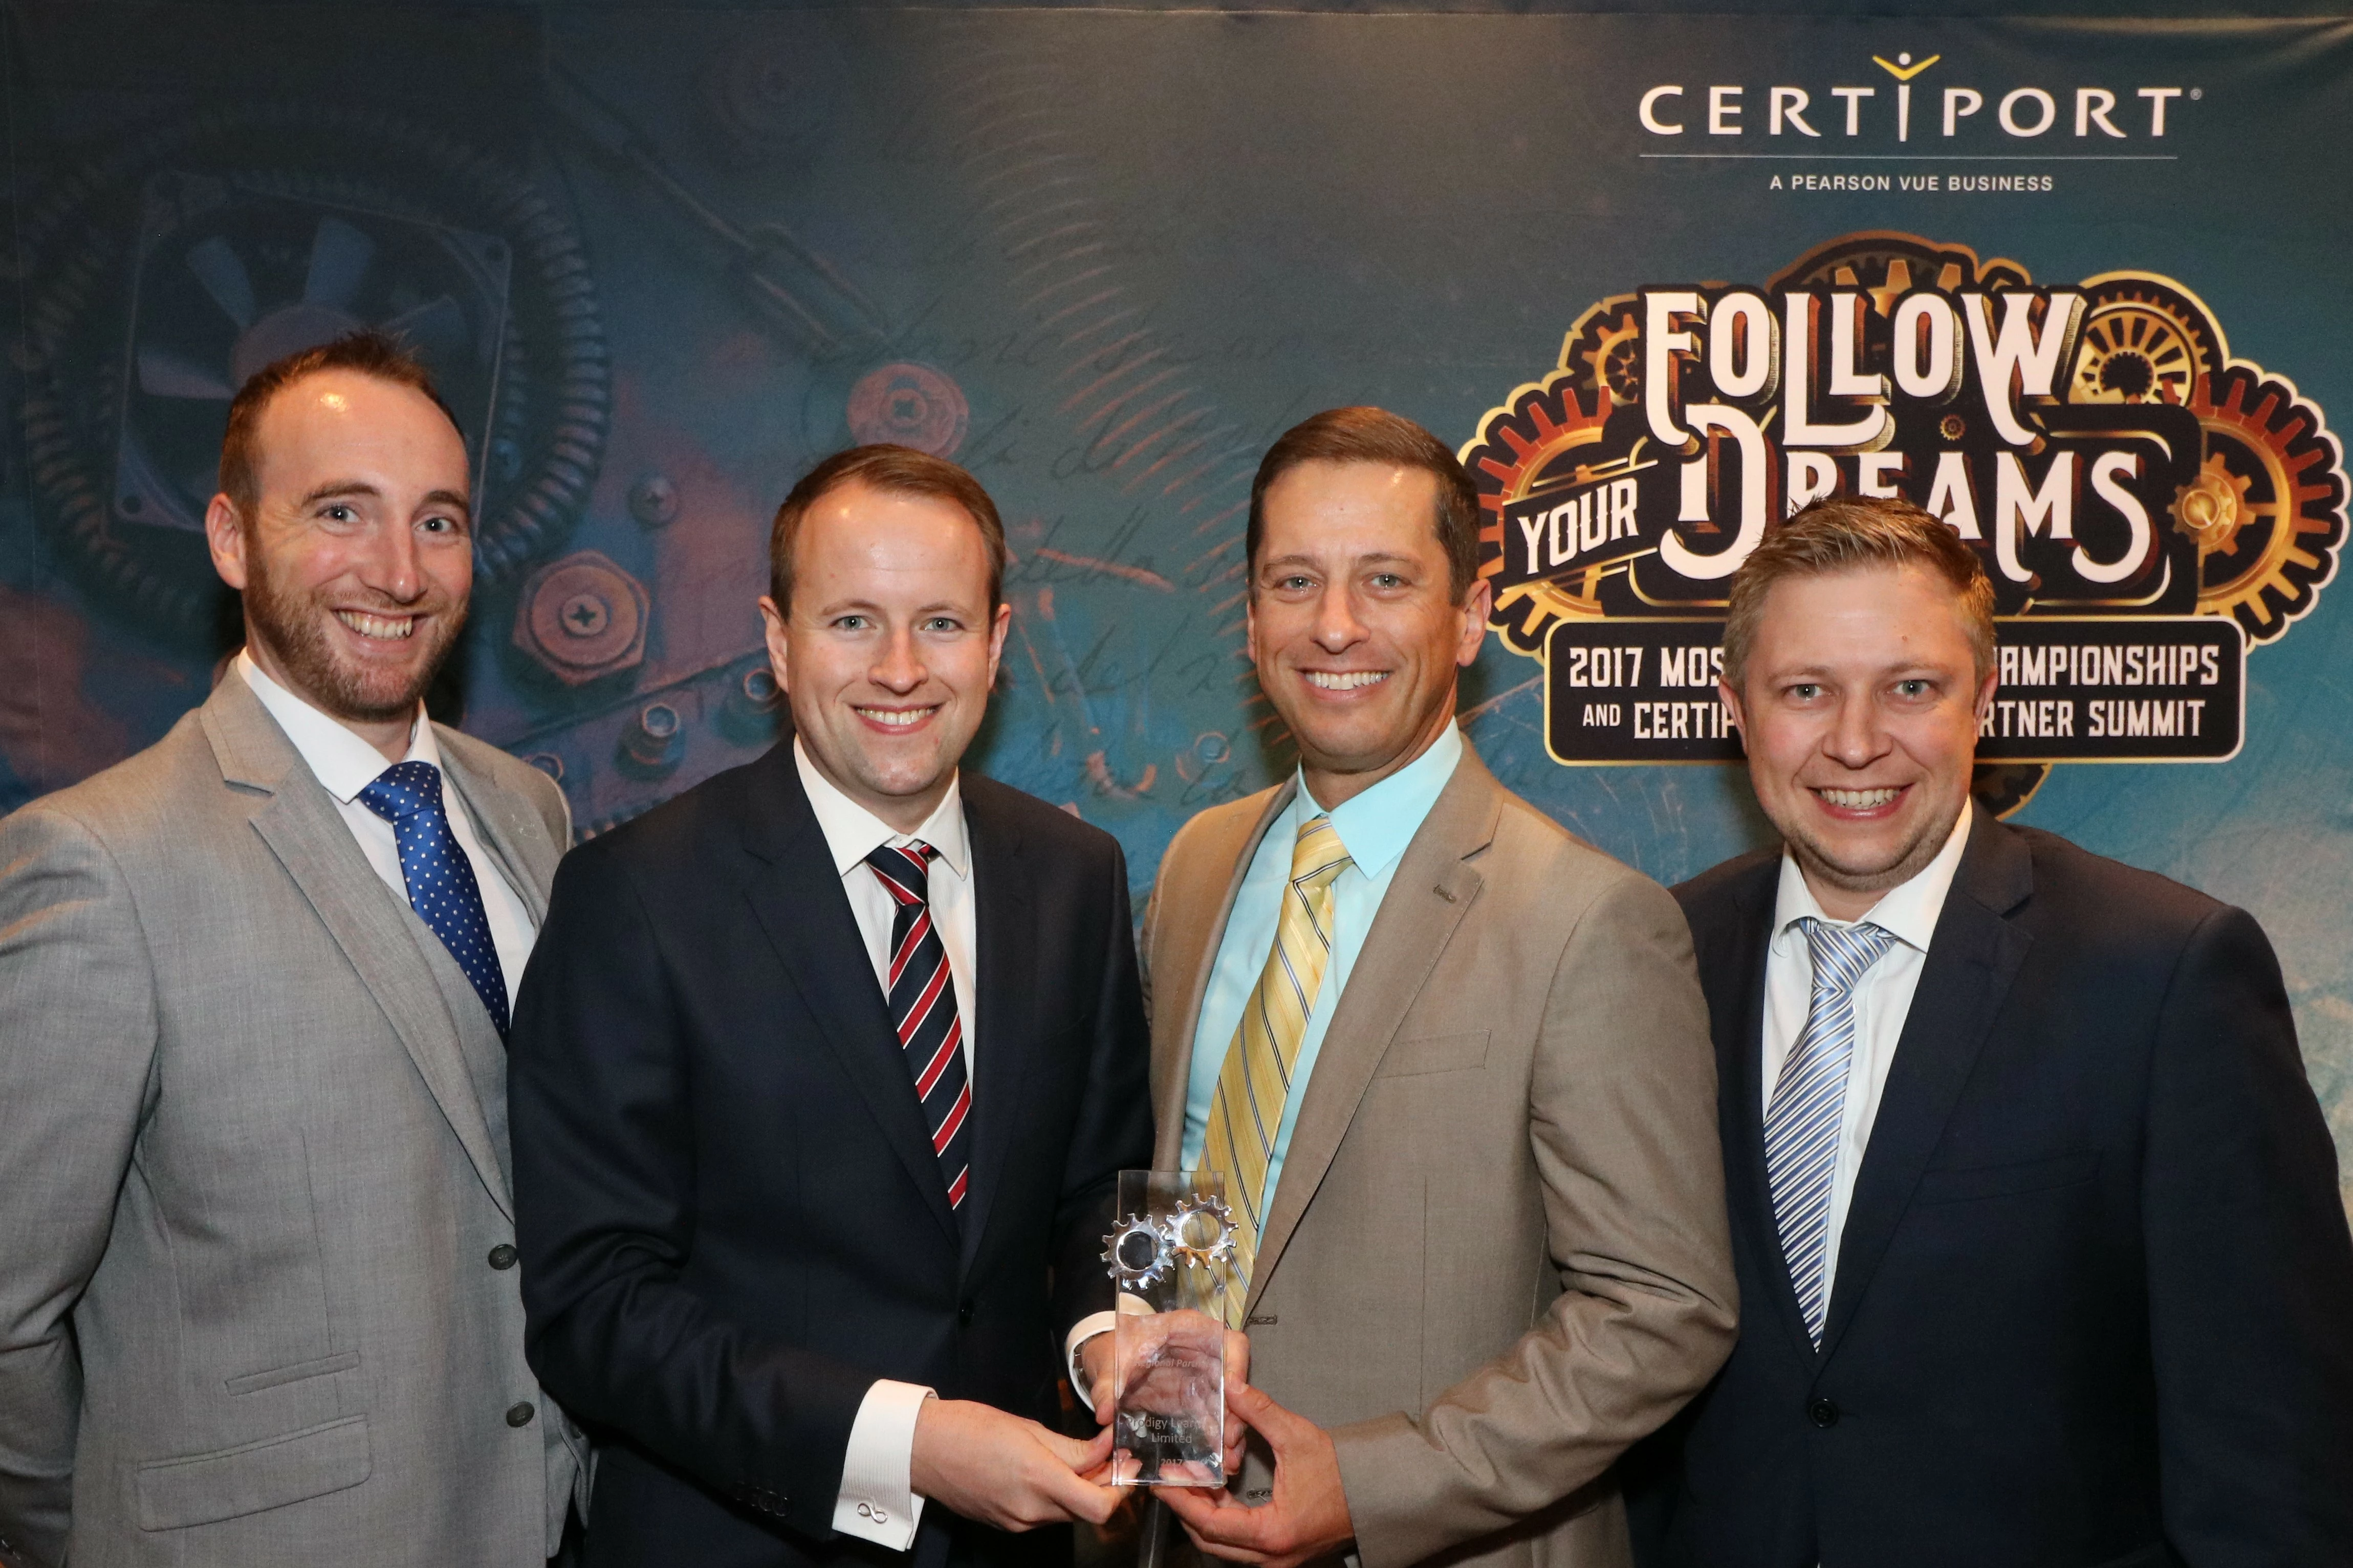 Pictured at the award presentation in Los Angeles are Billy Breen, Country Manager – Ireland, Prodigy Learning, Andrew Flood, CEO, Prodigy Learning, Aaron Osmond, General Manager, Certiport and Andrew Griggs, Country Manager – UK, Prodigy Learning.